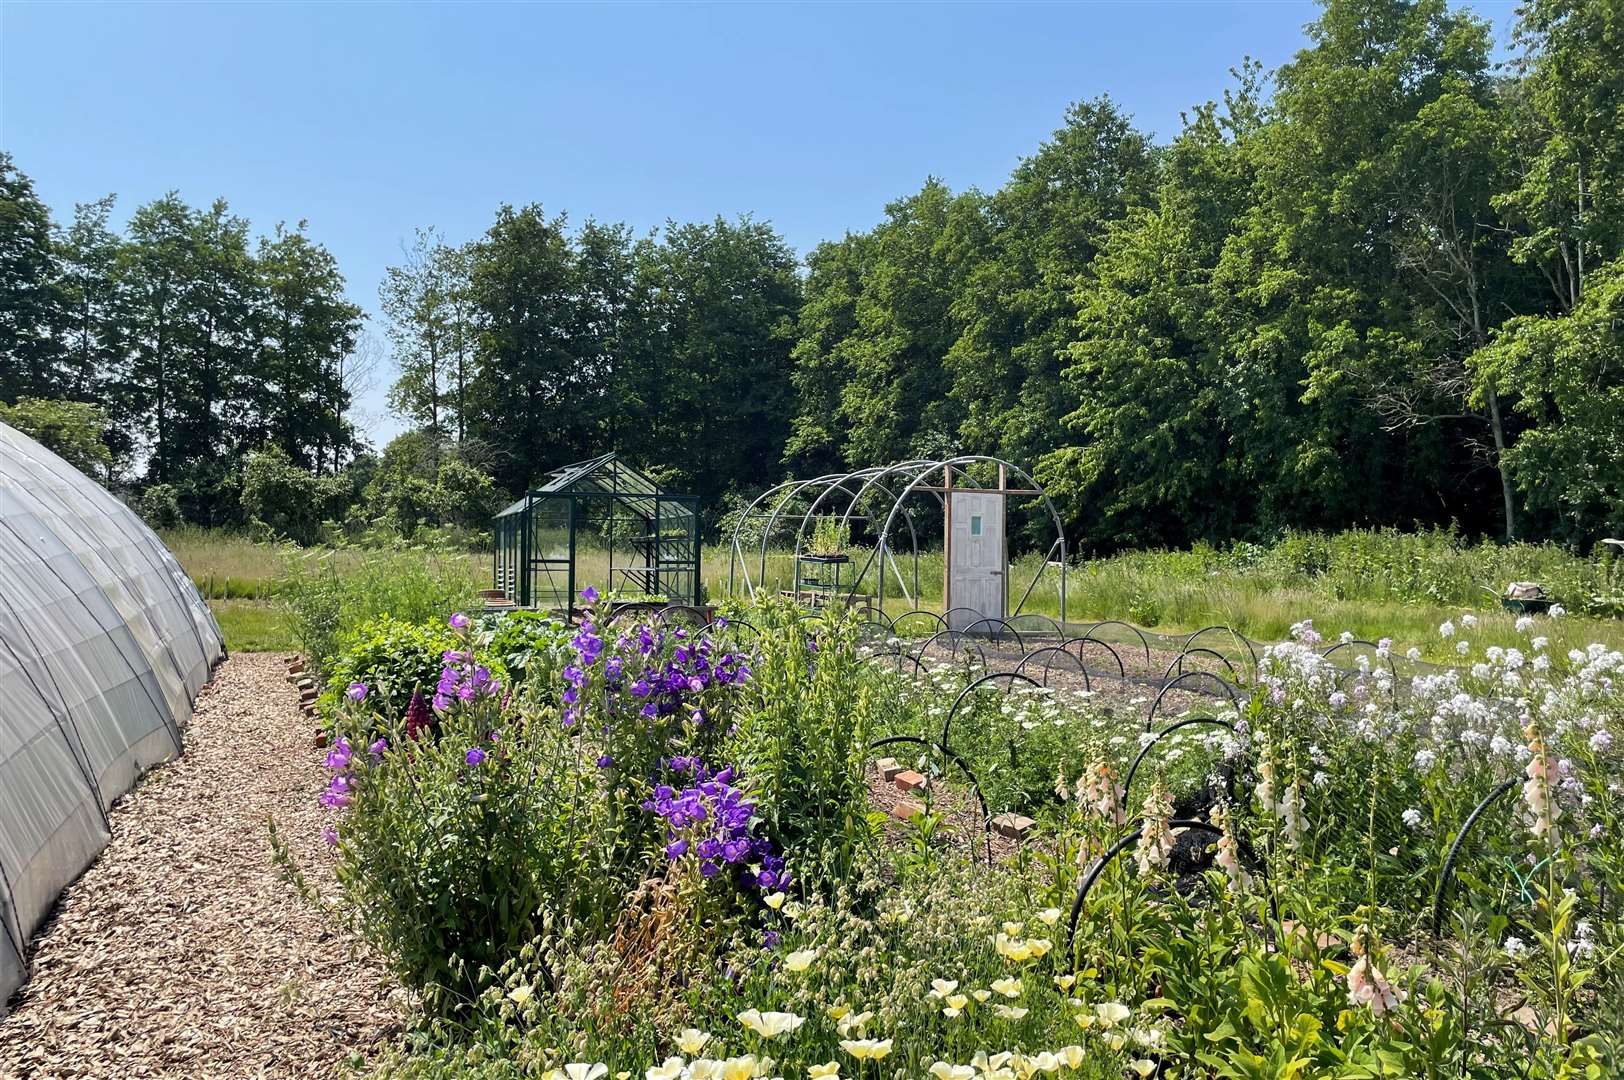 The community garden in Lynsted is a space where local enthusiasts can work together to grow produce. Picture: National Garden Scheme